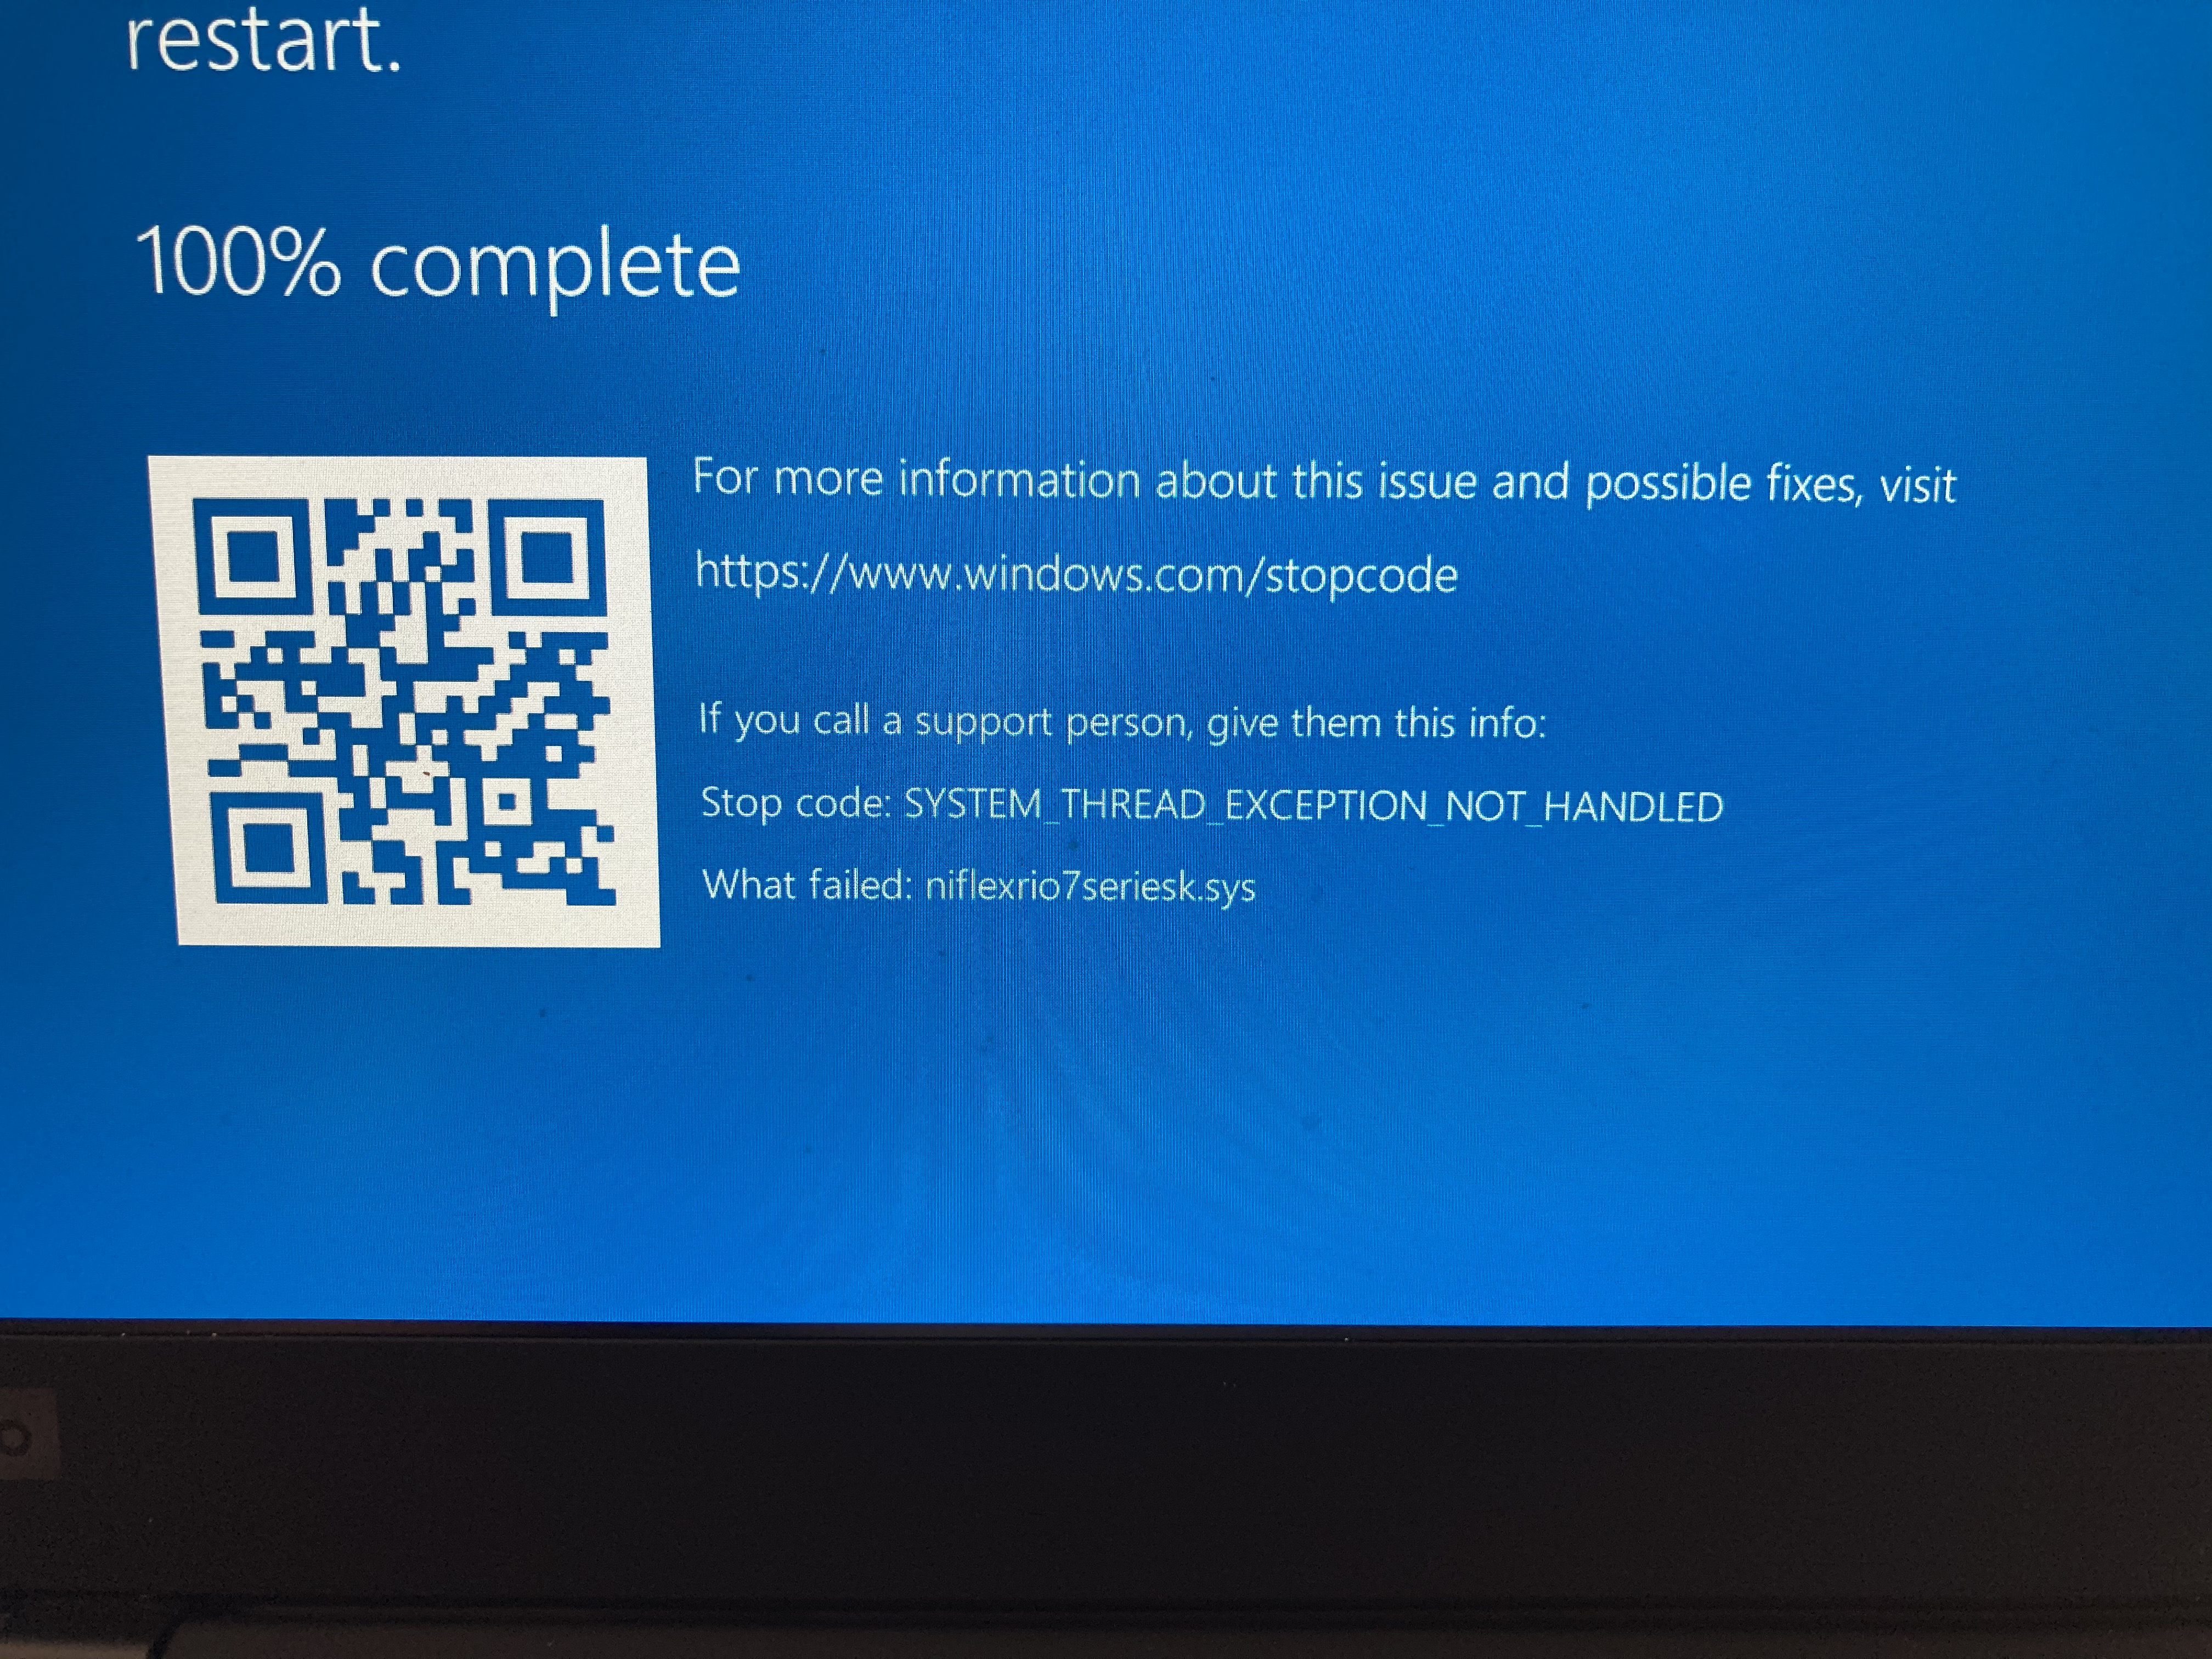 Win 10 blue screen when connect to device through 3 - Microsoft Community